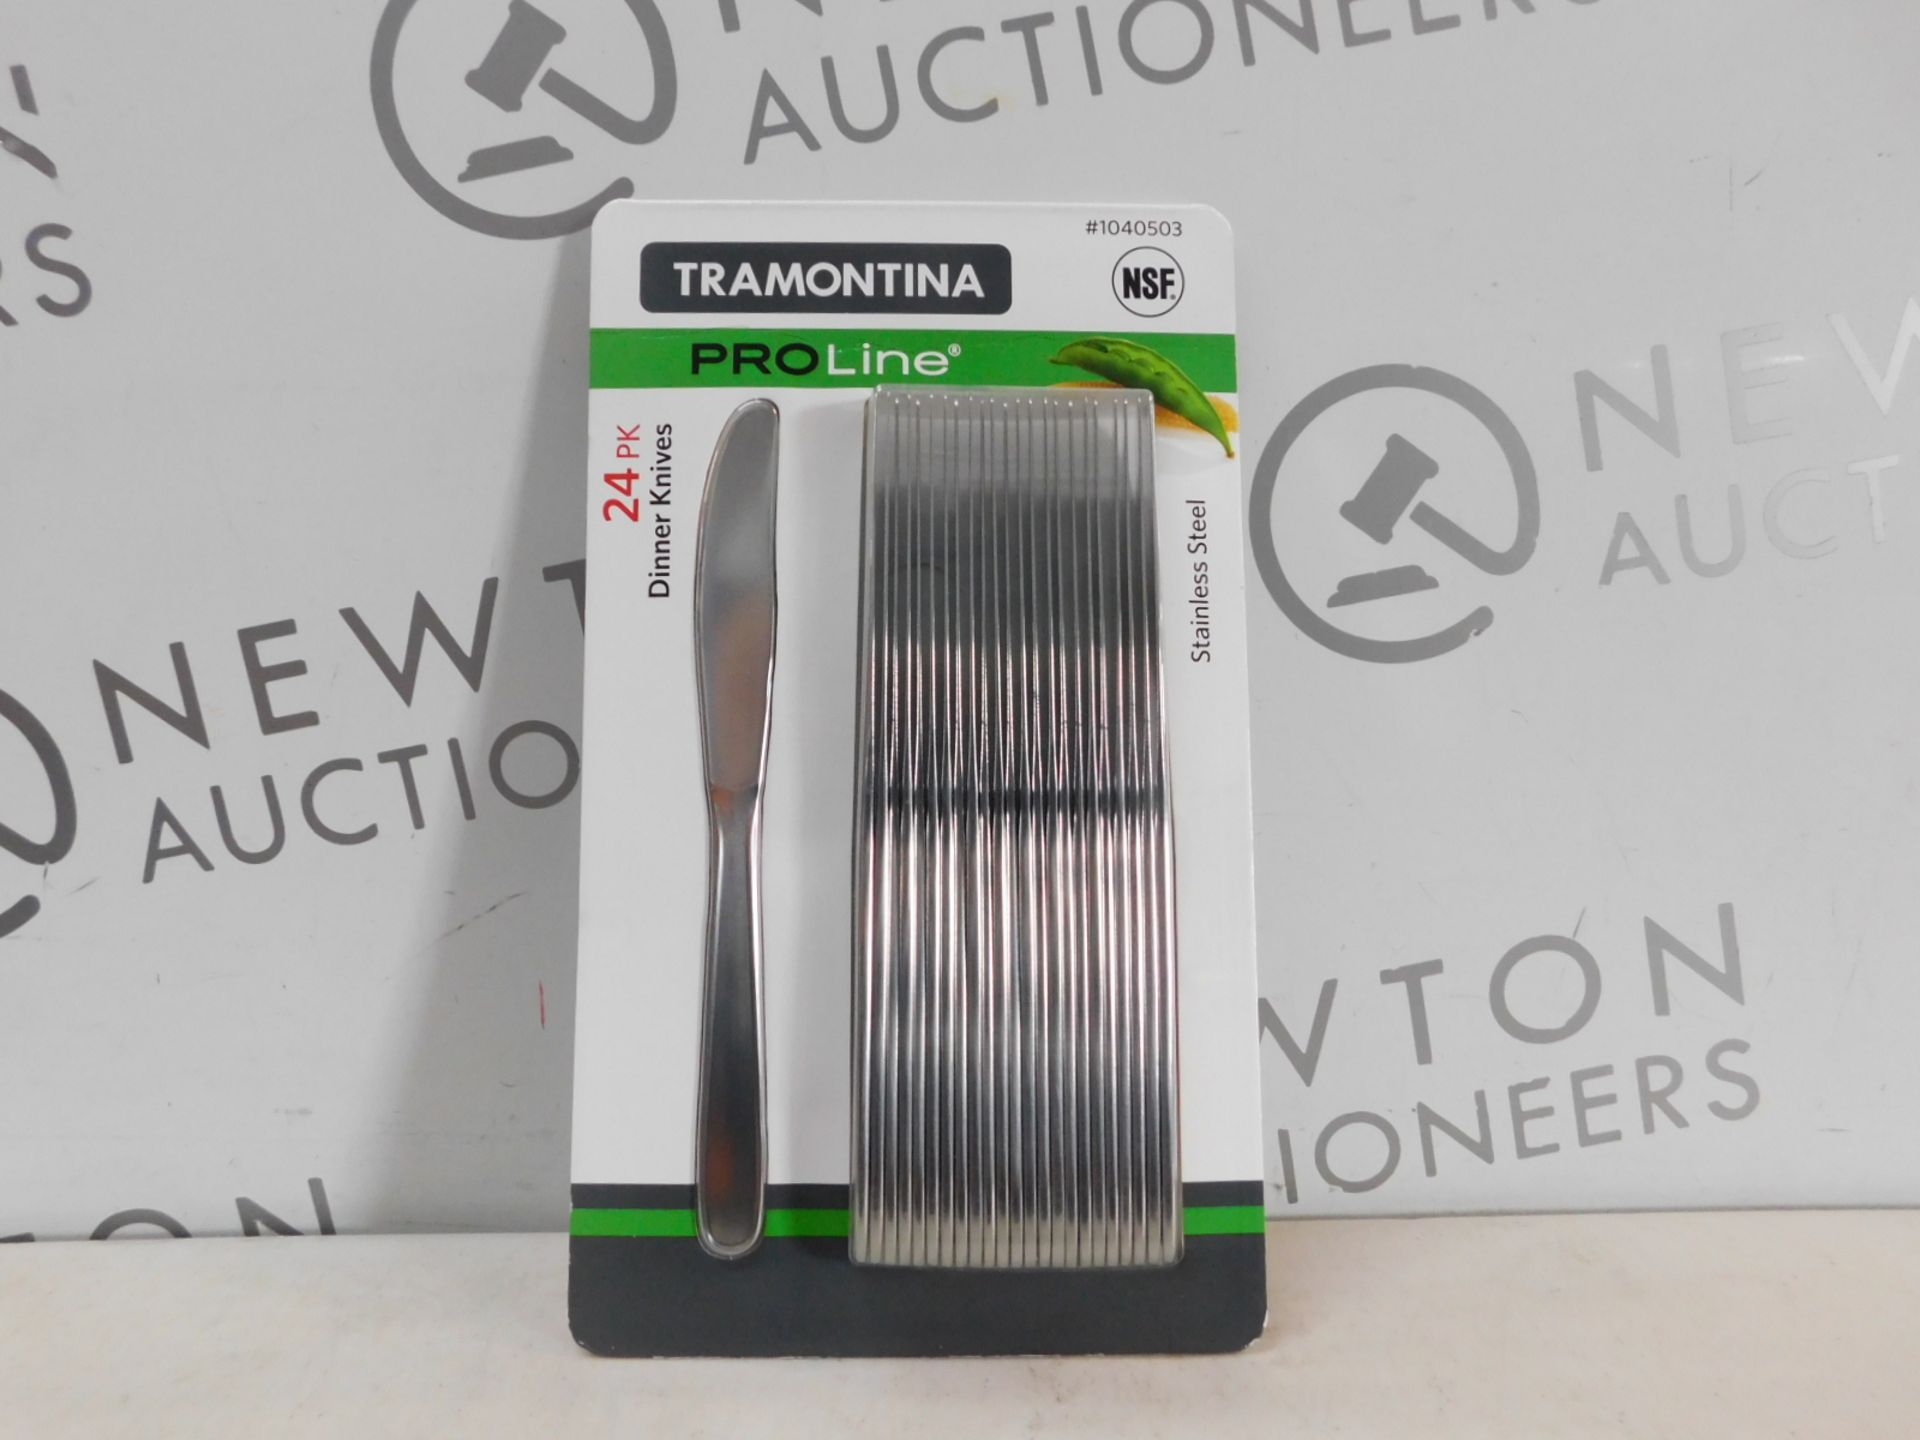 1 BRAND NEW PACK OF TRAMONTINA PROLINE 24PK STAINLESS STEEL DINNER KNIVES RRP Â£22.99 - Image 2 of 2